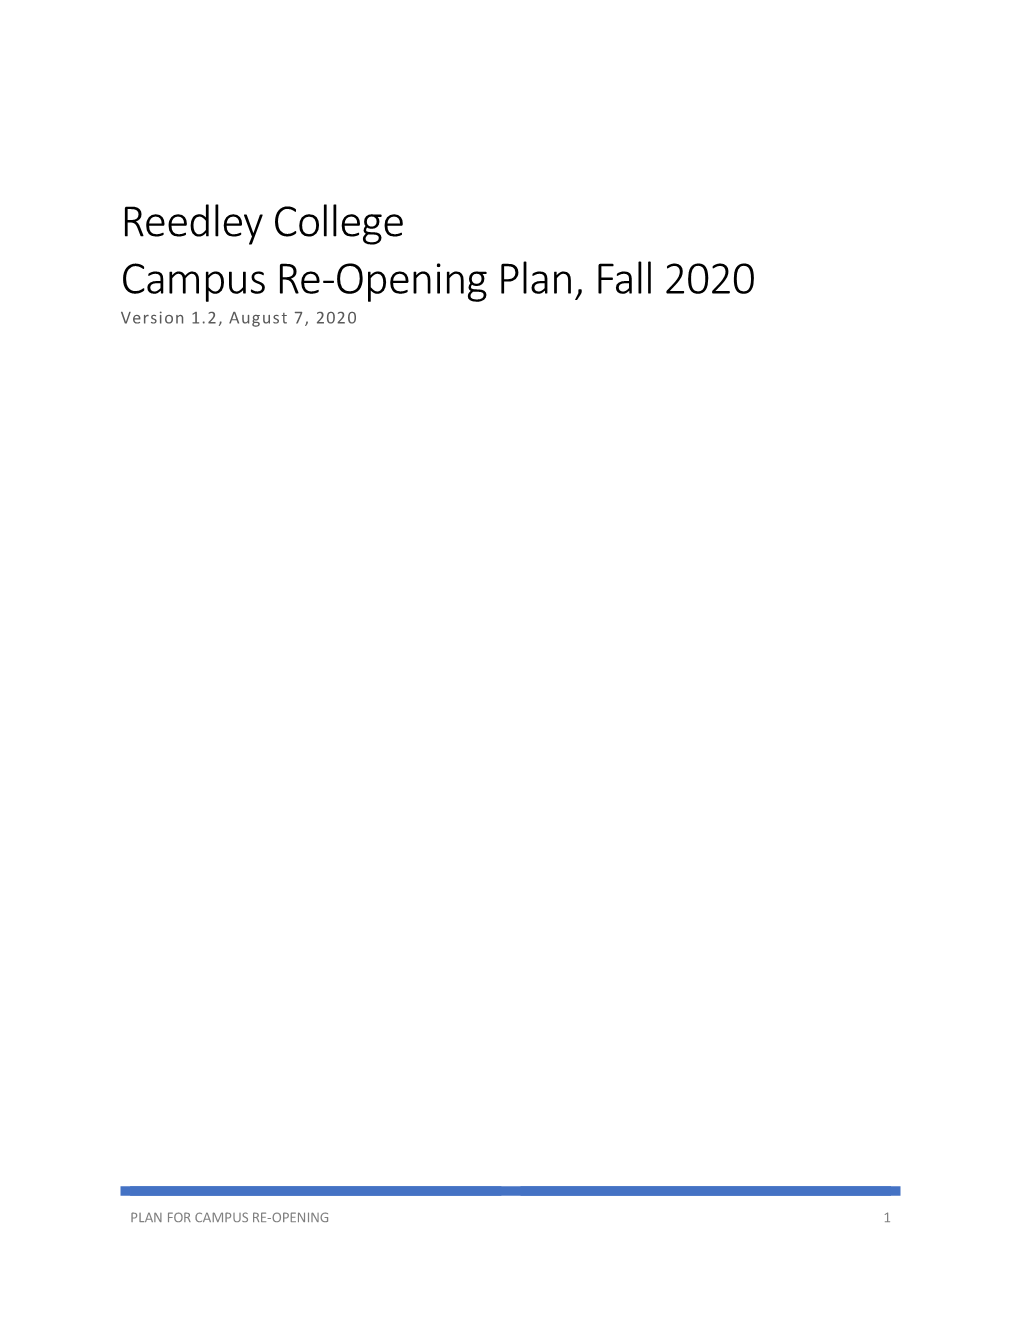 Reedley College, Campus Re-Opening Plan Fall 2020